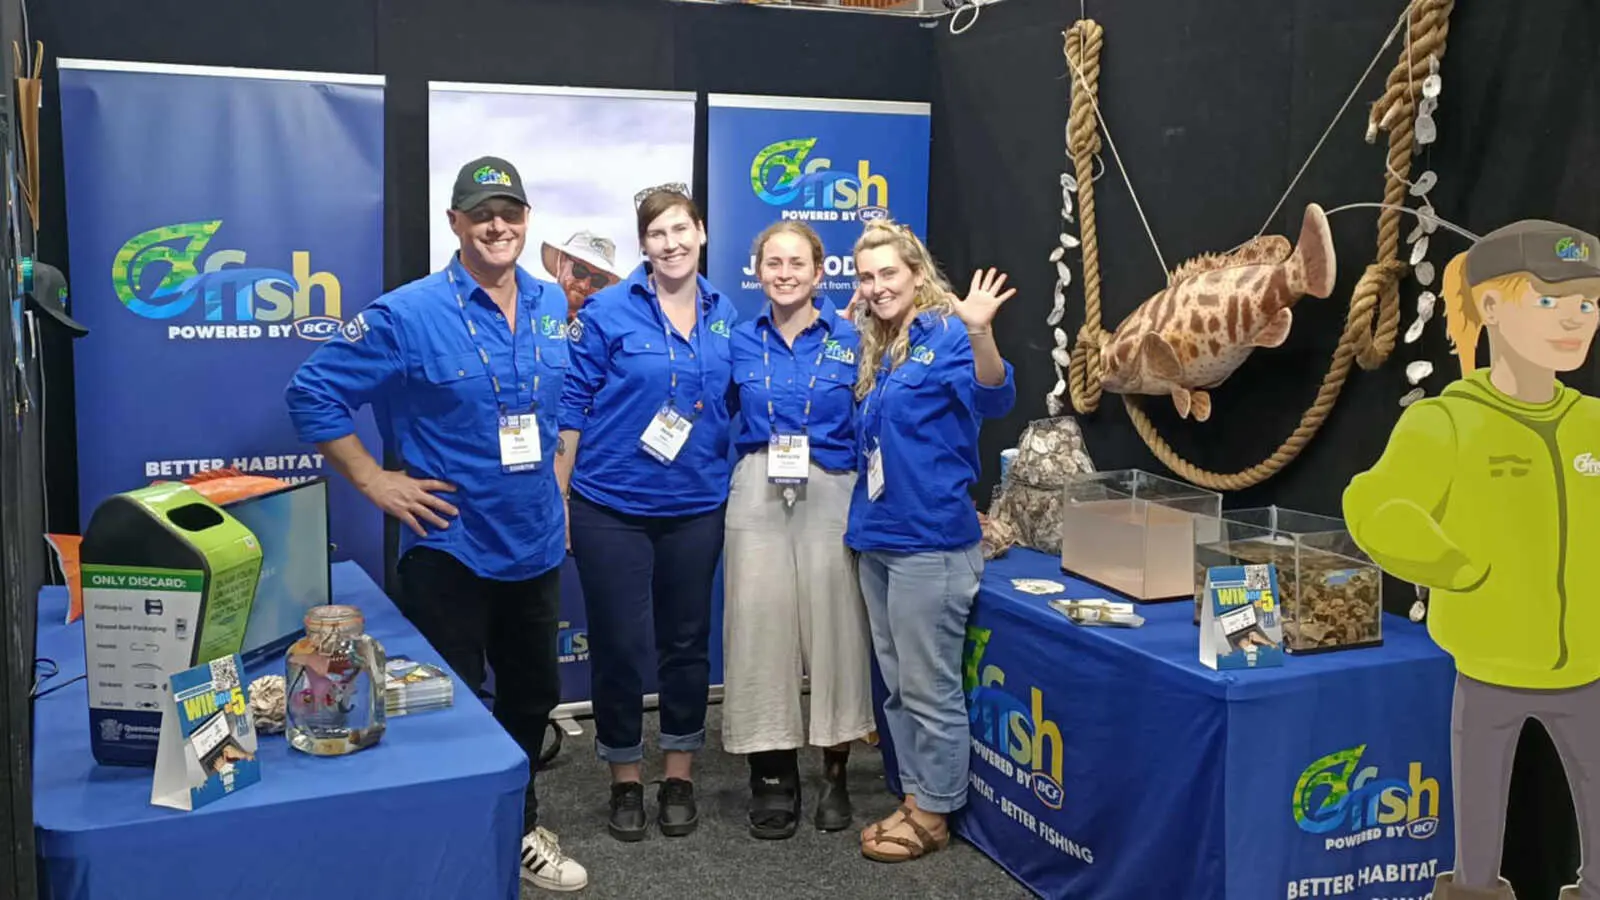 Four people wearing blue shirts standing at an OzFish stall at an expo